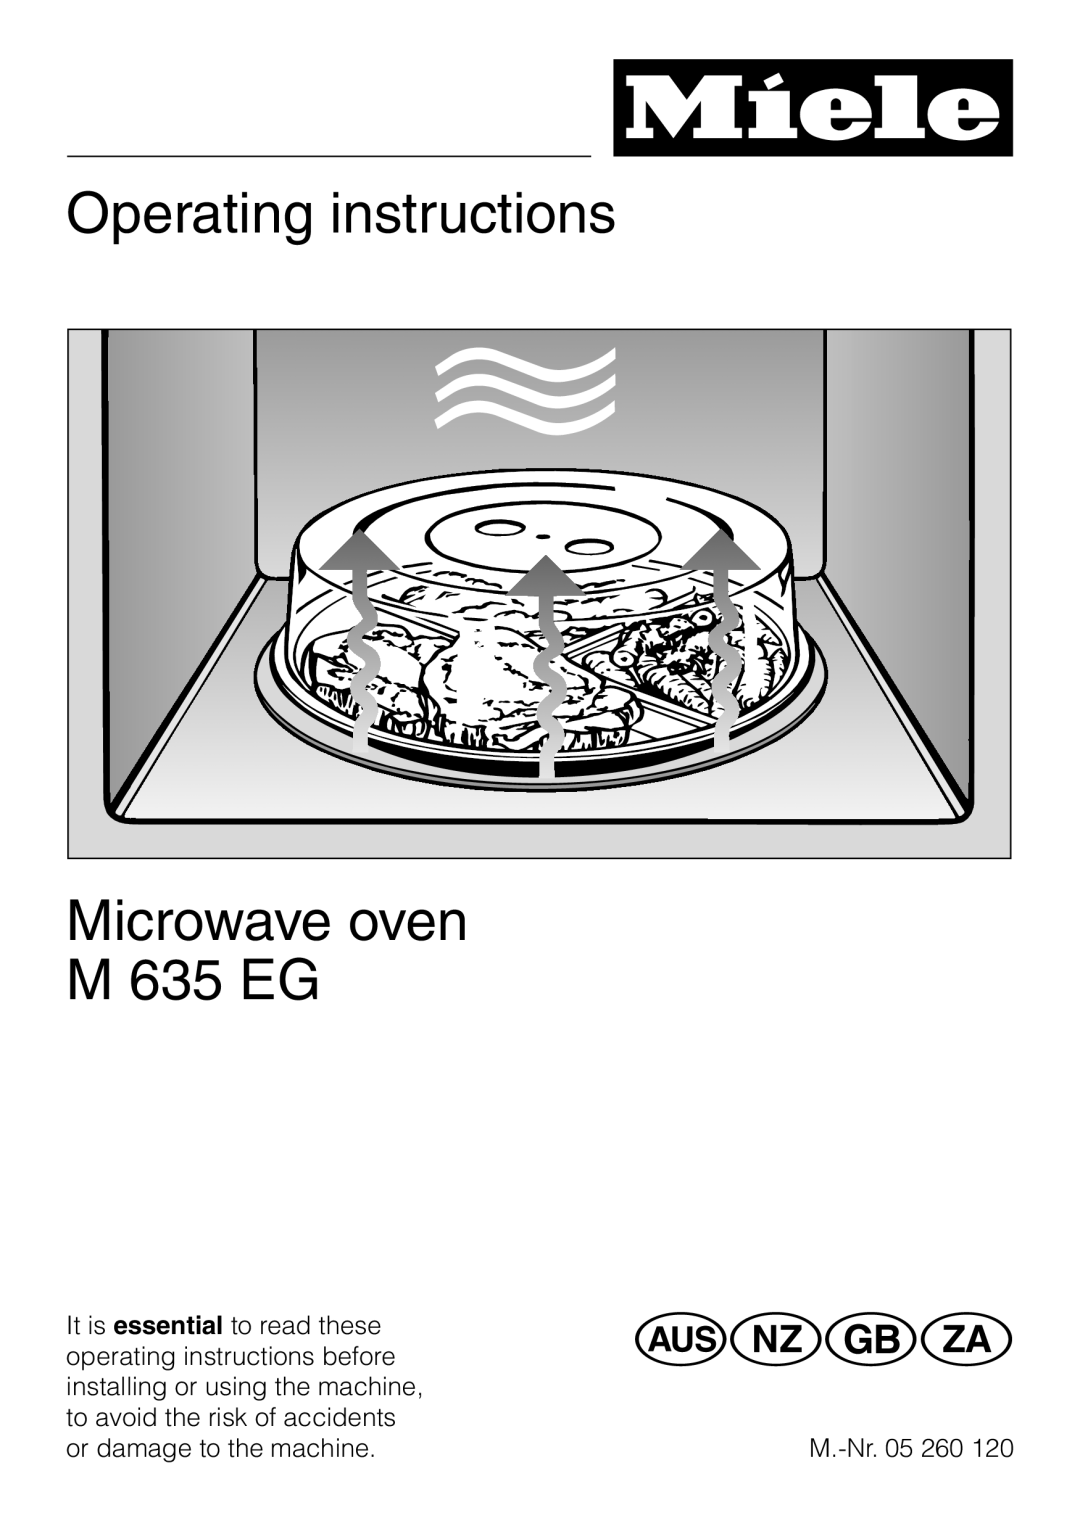 Miele manual Operating instructions Microwave oven M 635 EG, Wogz 